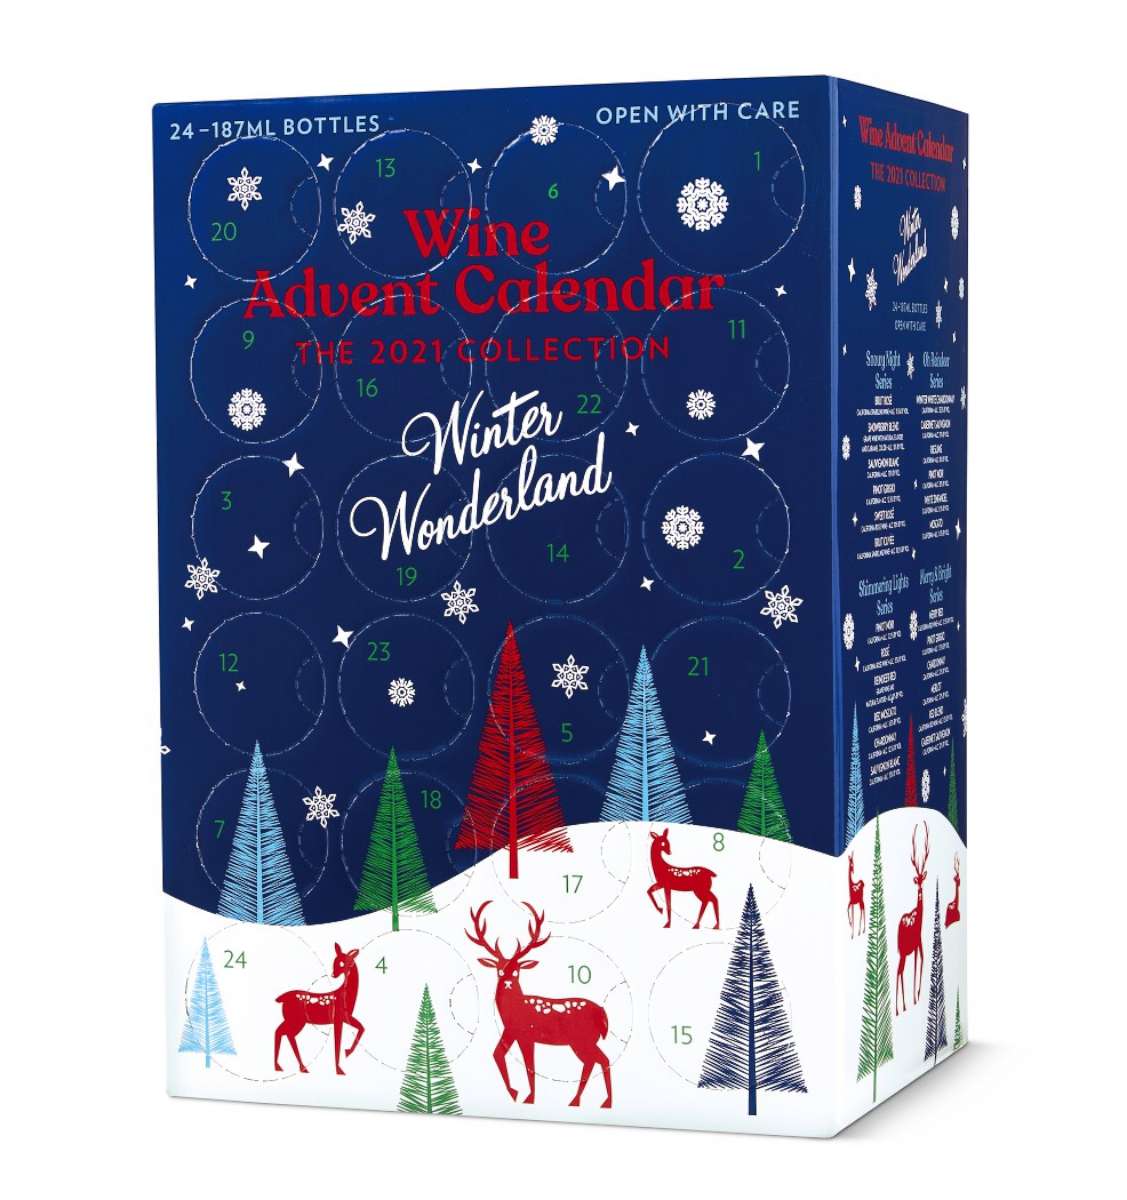 Wine, cheese and Dolly Partonthemed advent calendars hitting holiday